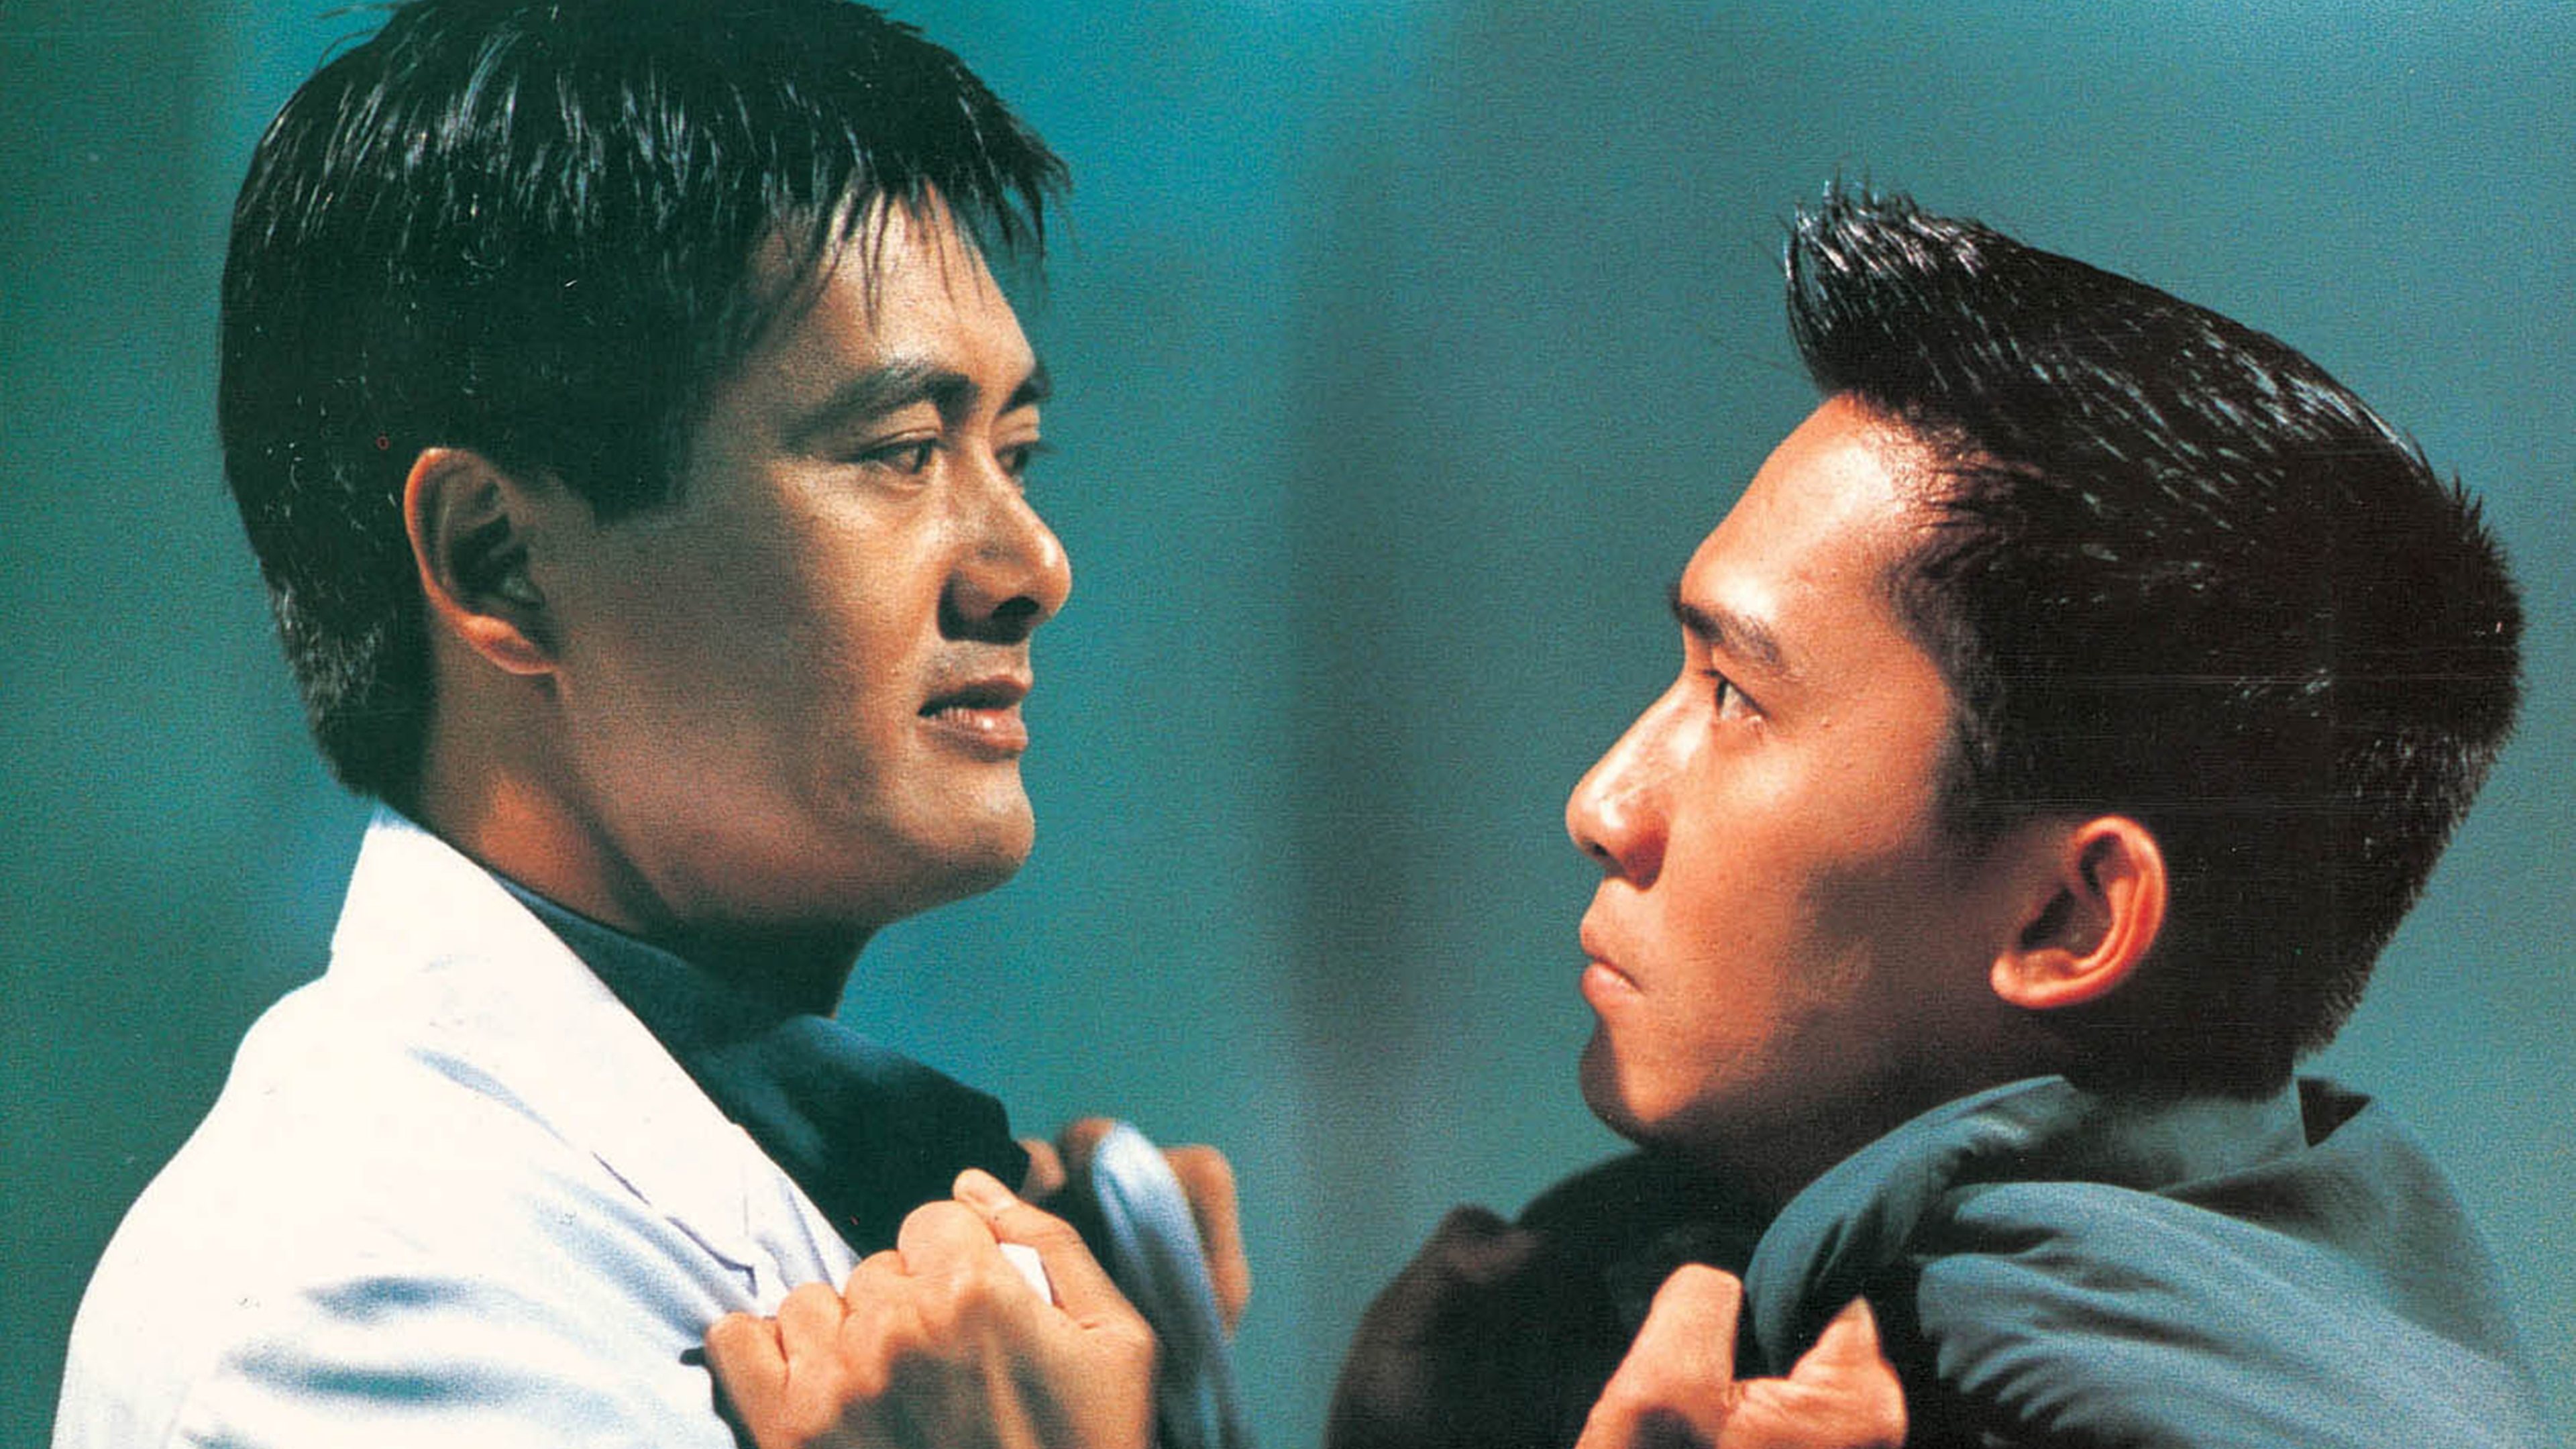 Chow Yun-fat (left) and Tony Leung Chiu-wai in a still from Hard Boiled.